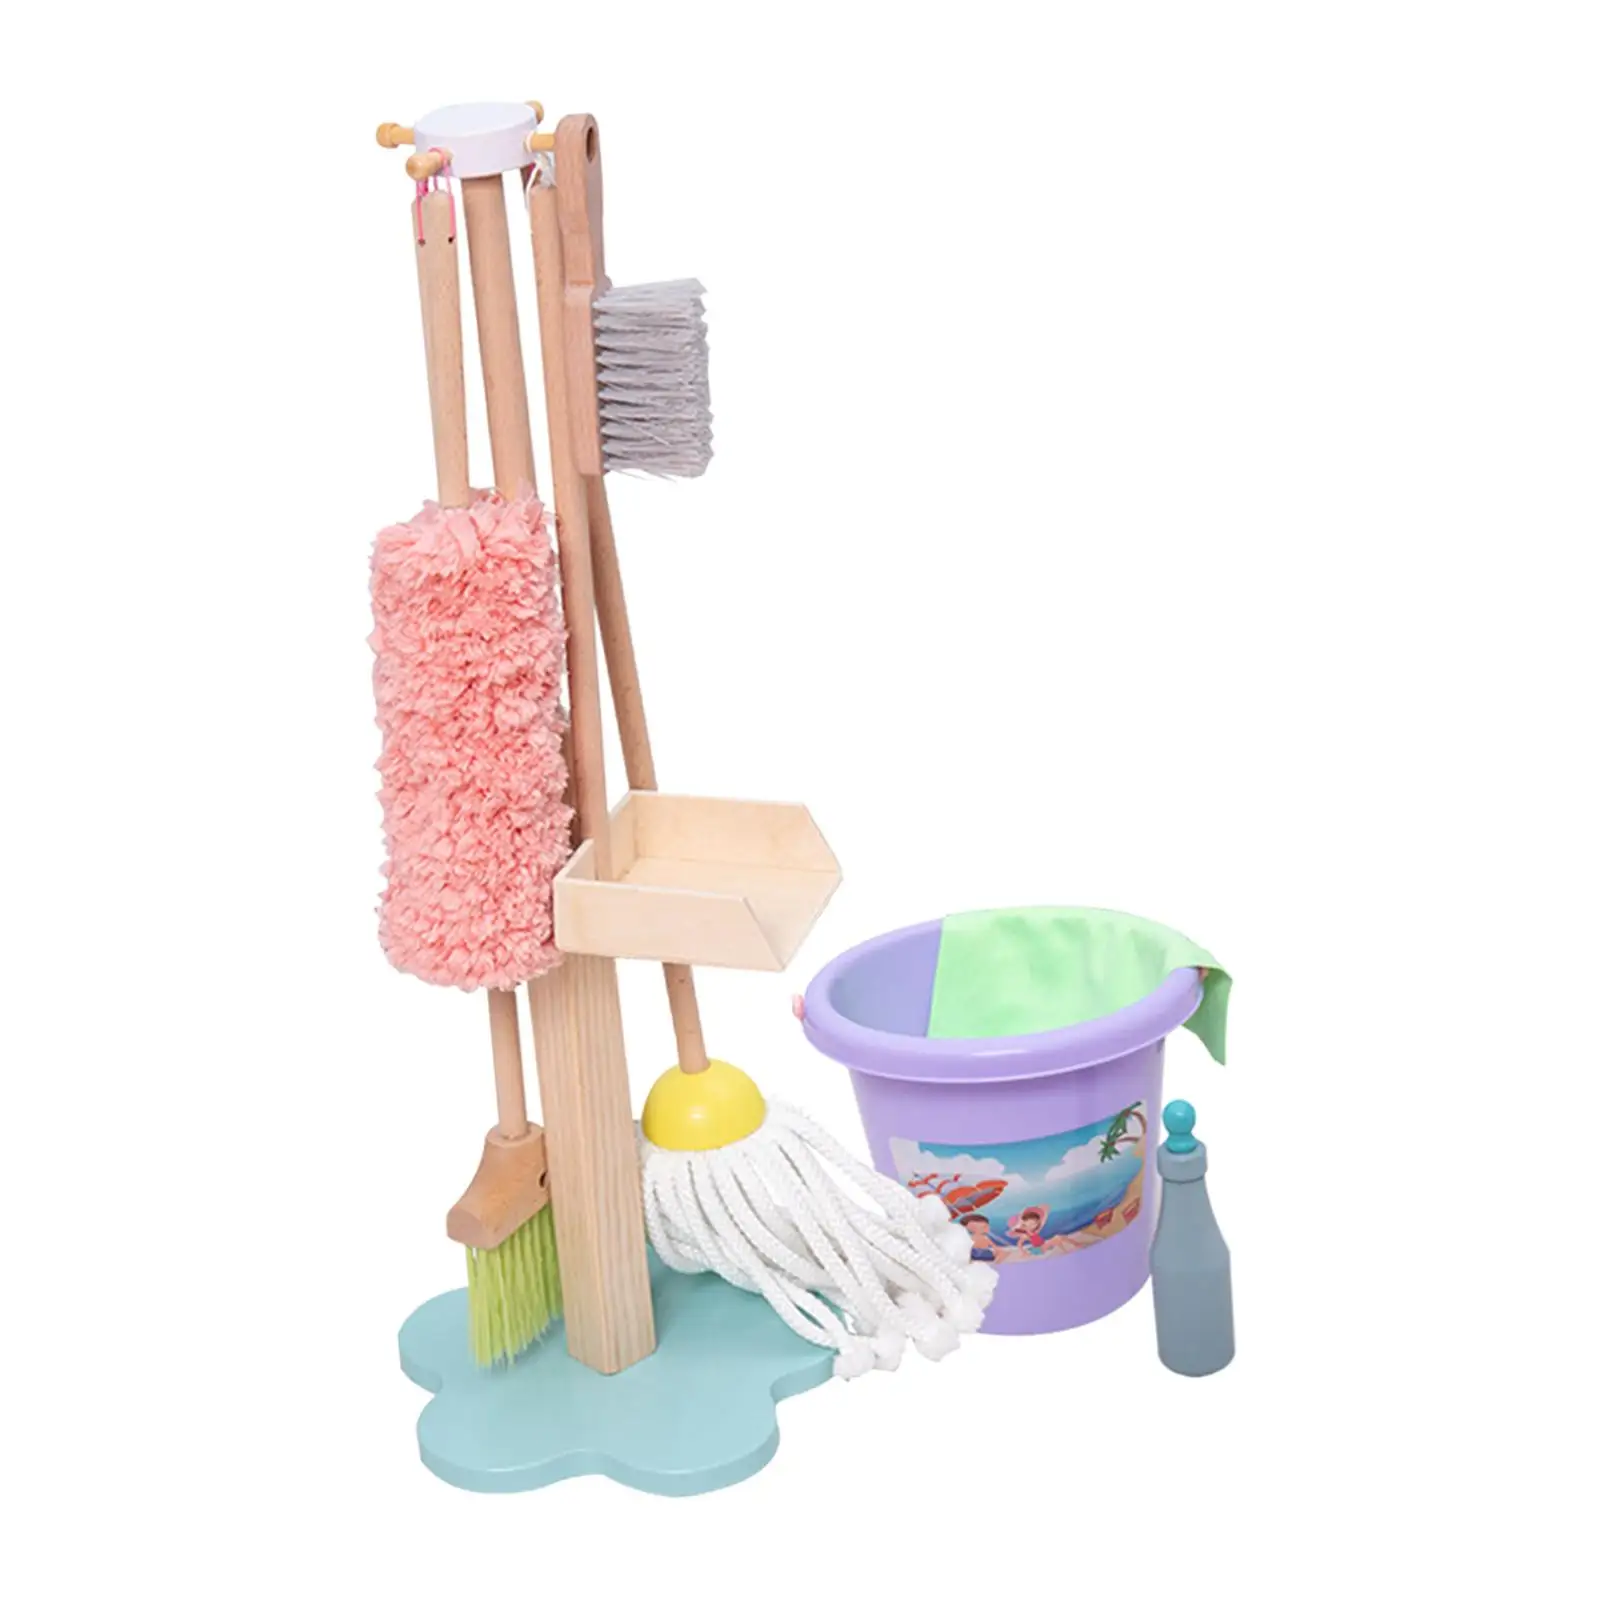 9x Simulation Broom and Cleaning Set Role Pretend Brush Organizing Stand